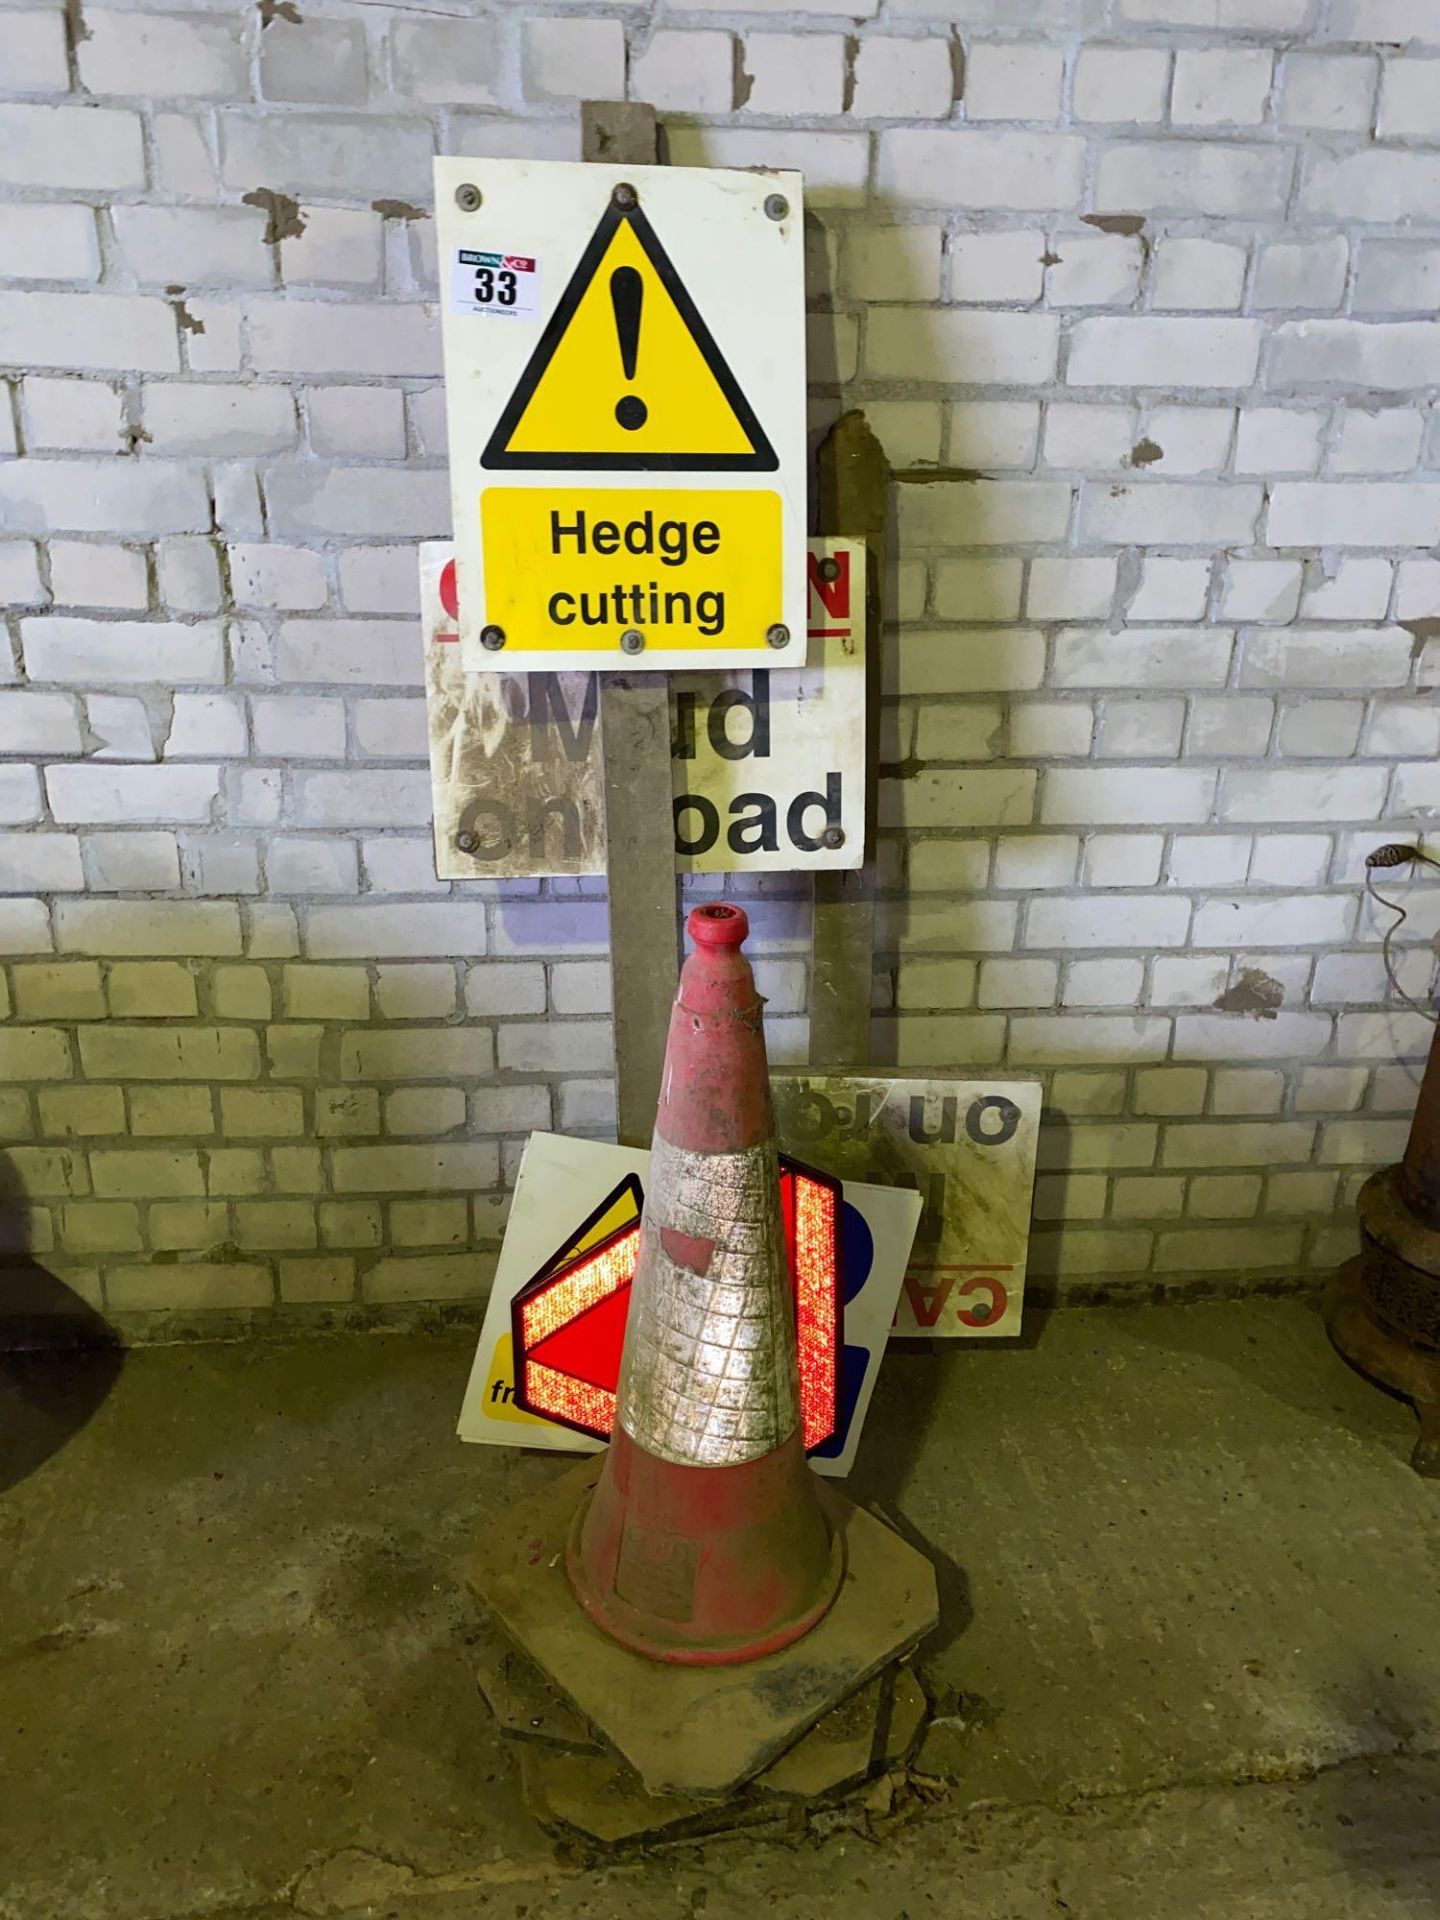 Warning signs and road cones